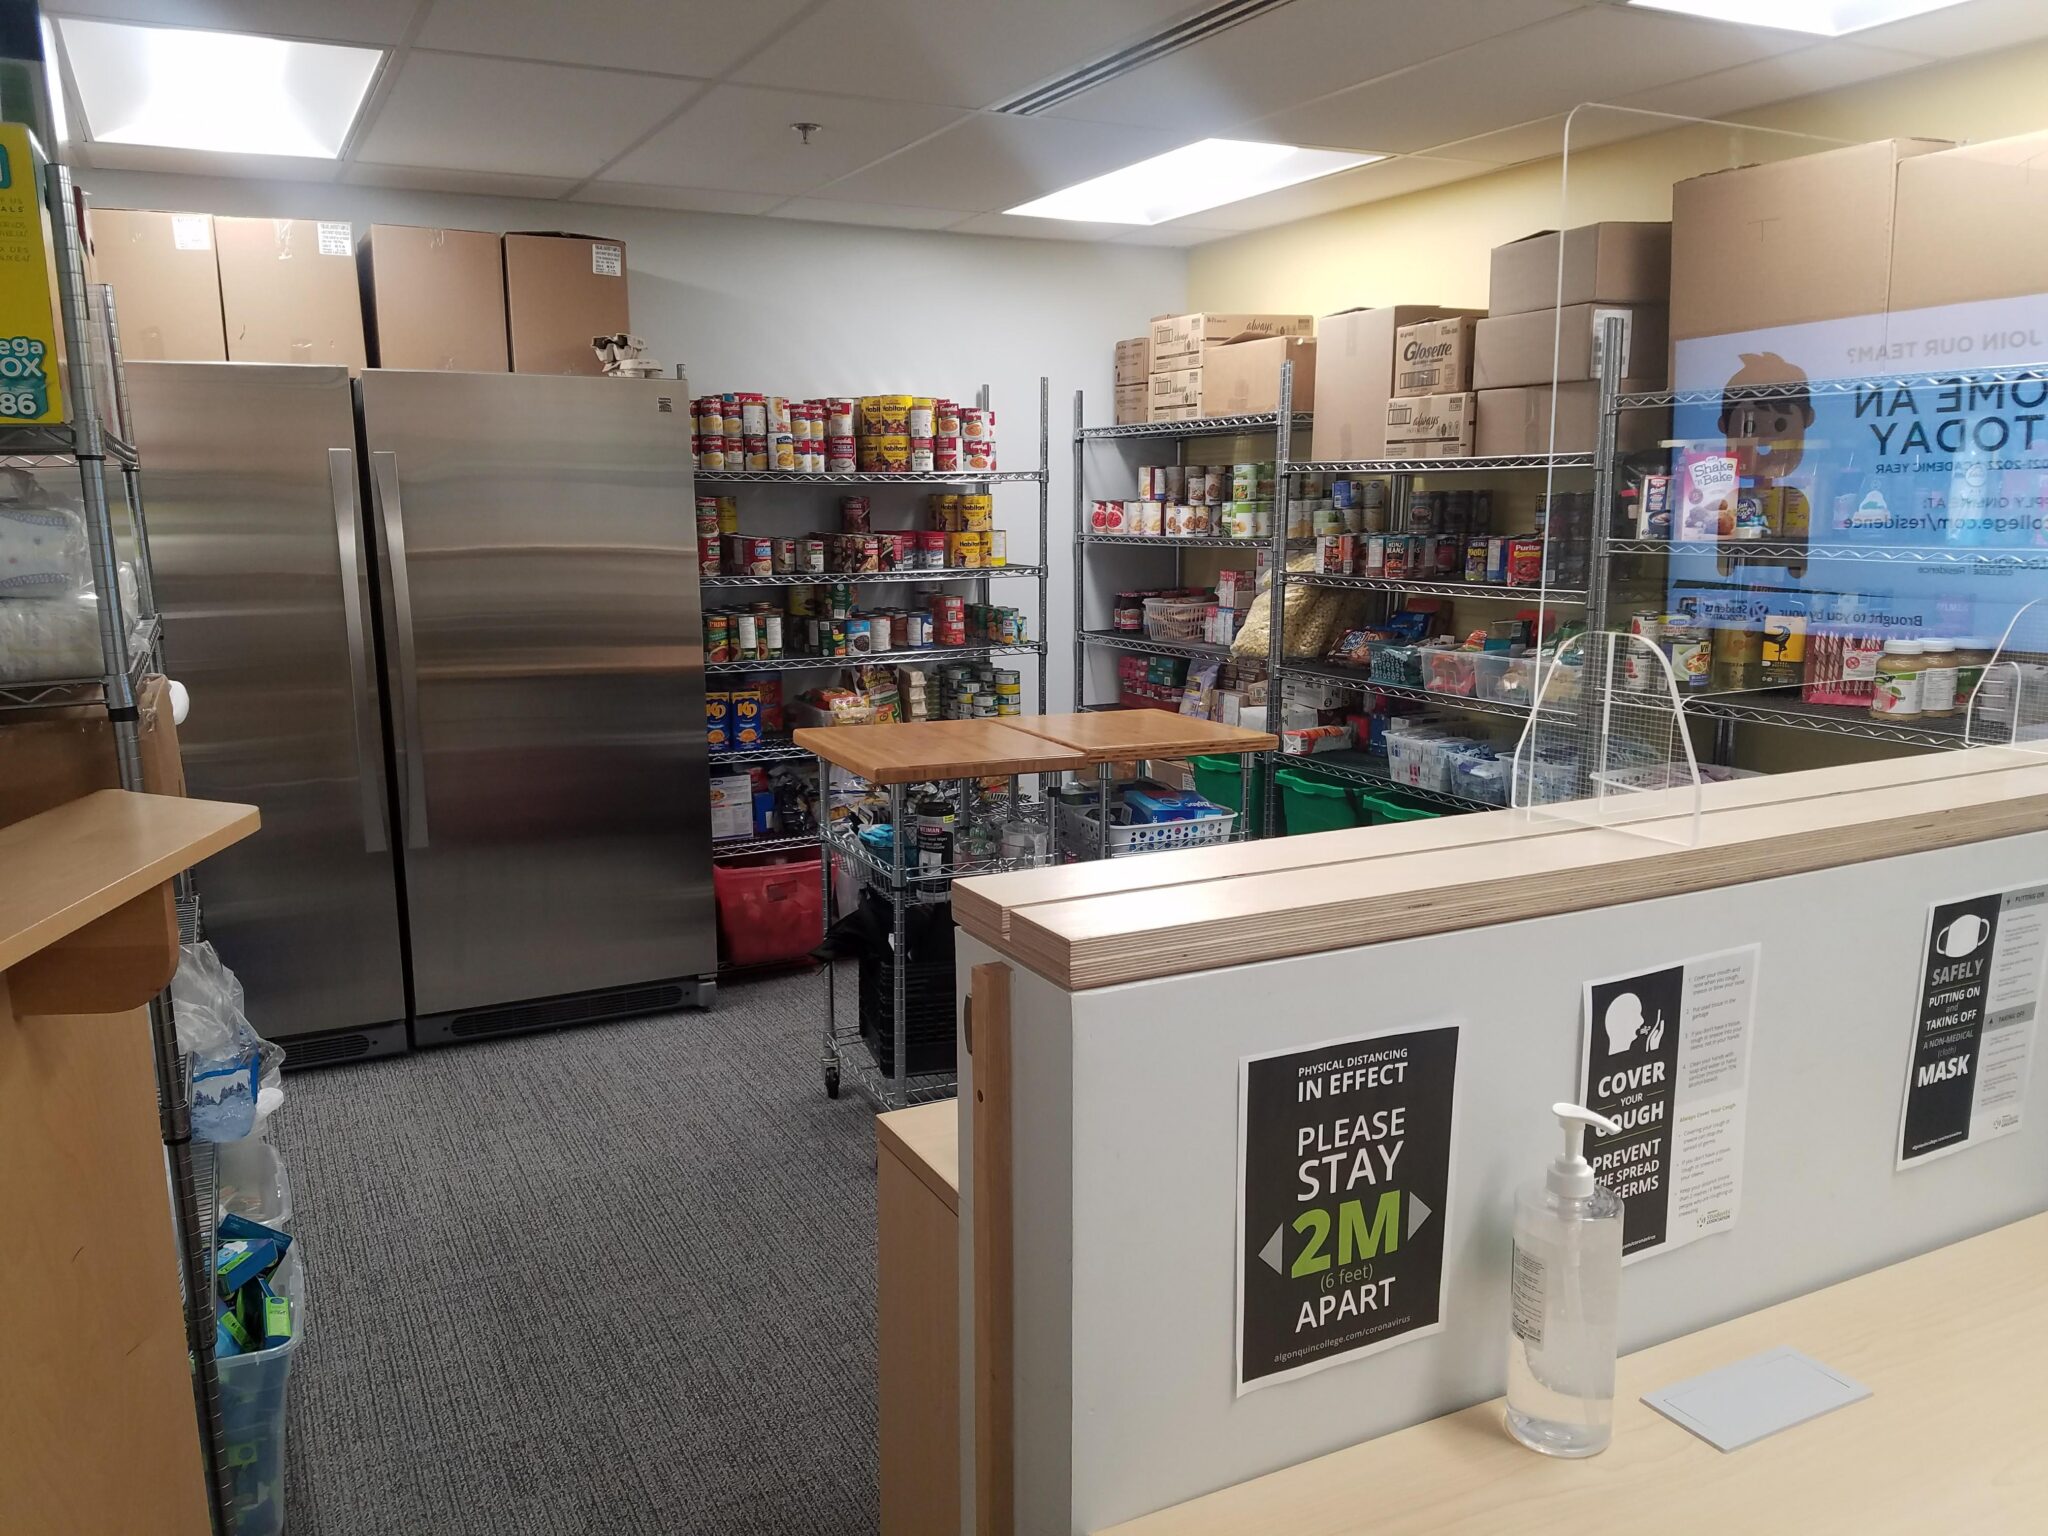 The Food Cupboard operates as an emergency food source for students in financial distress, offering a three-day supply of food once per month as needed